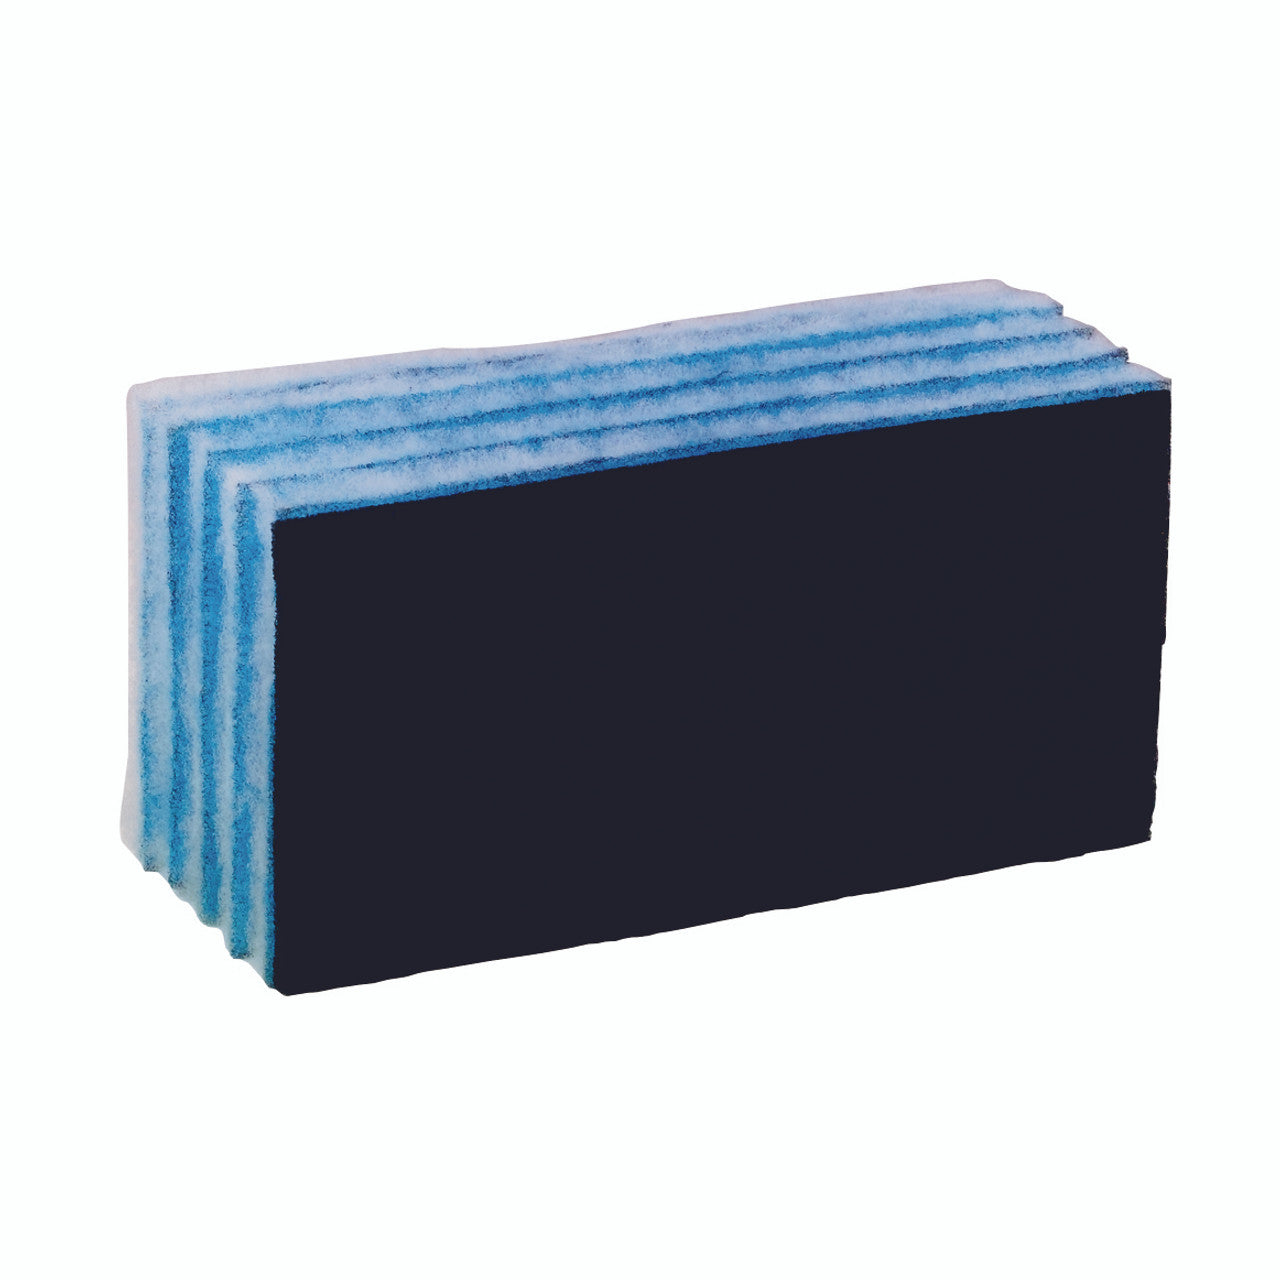 Cretors Disposable Filter 9" x 12" 5 pieces for better performance of popcorn machines.